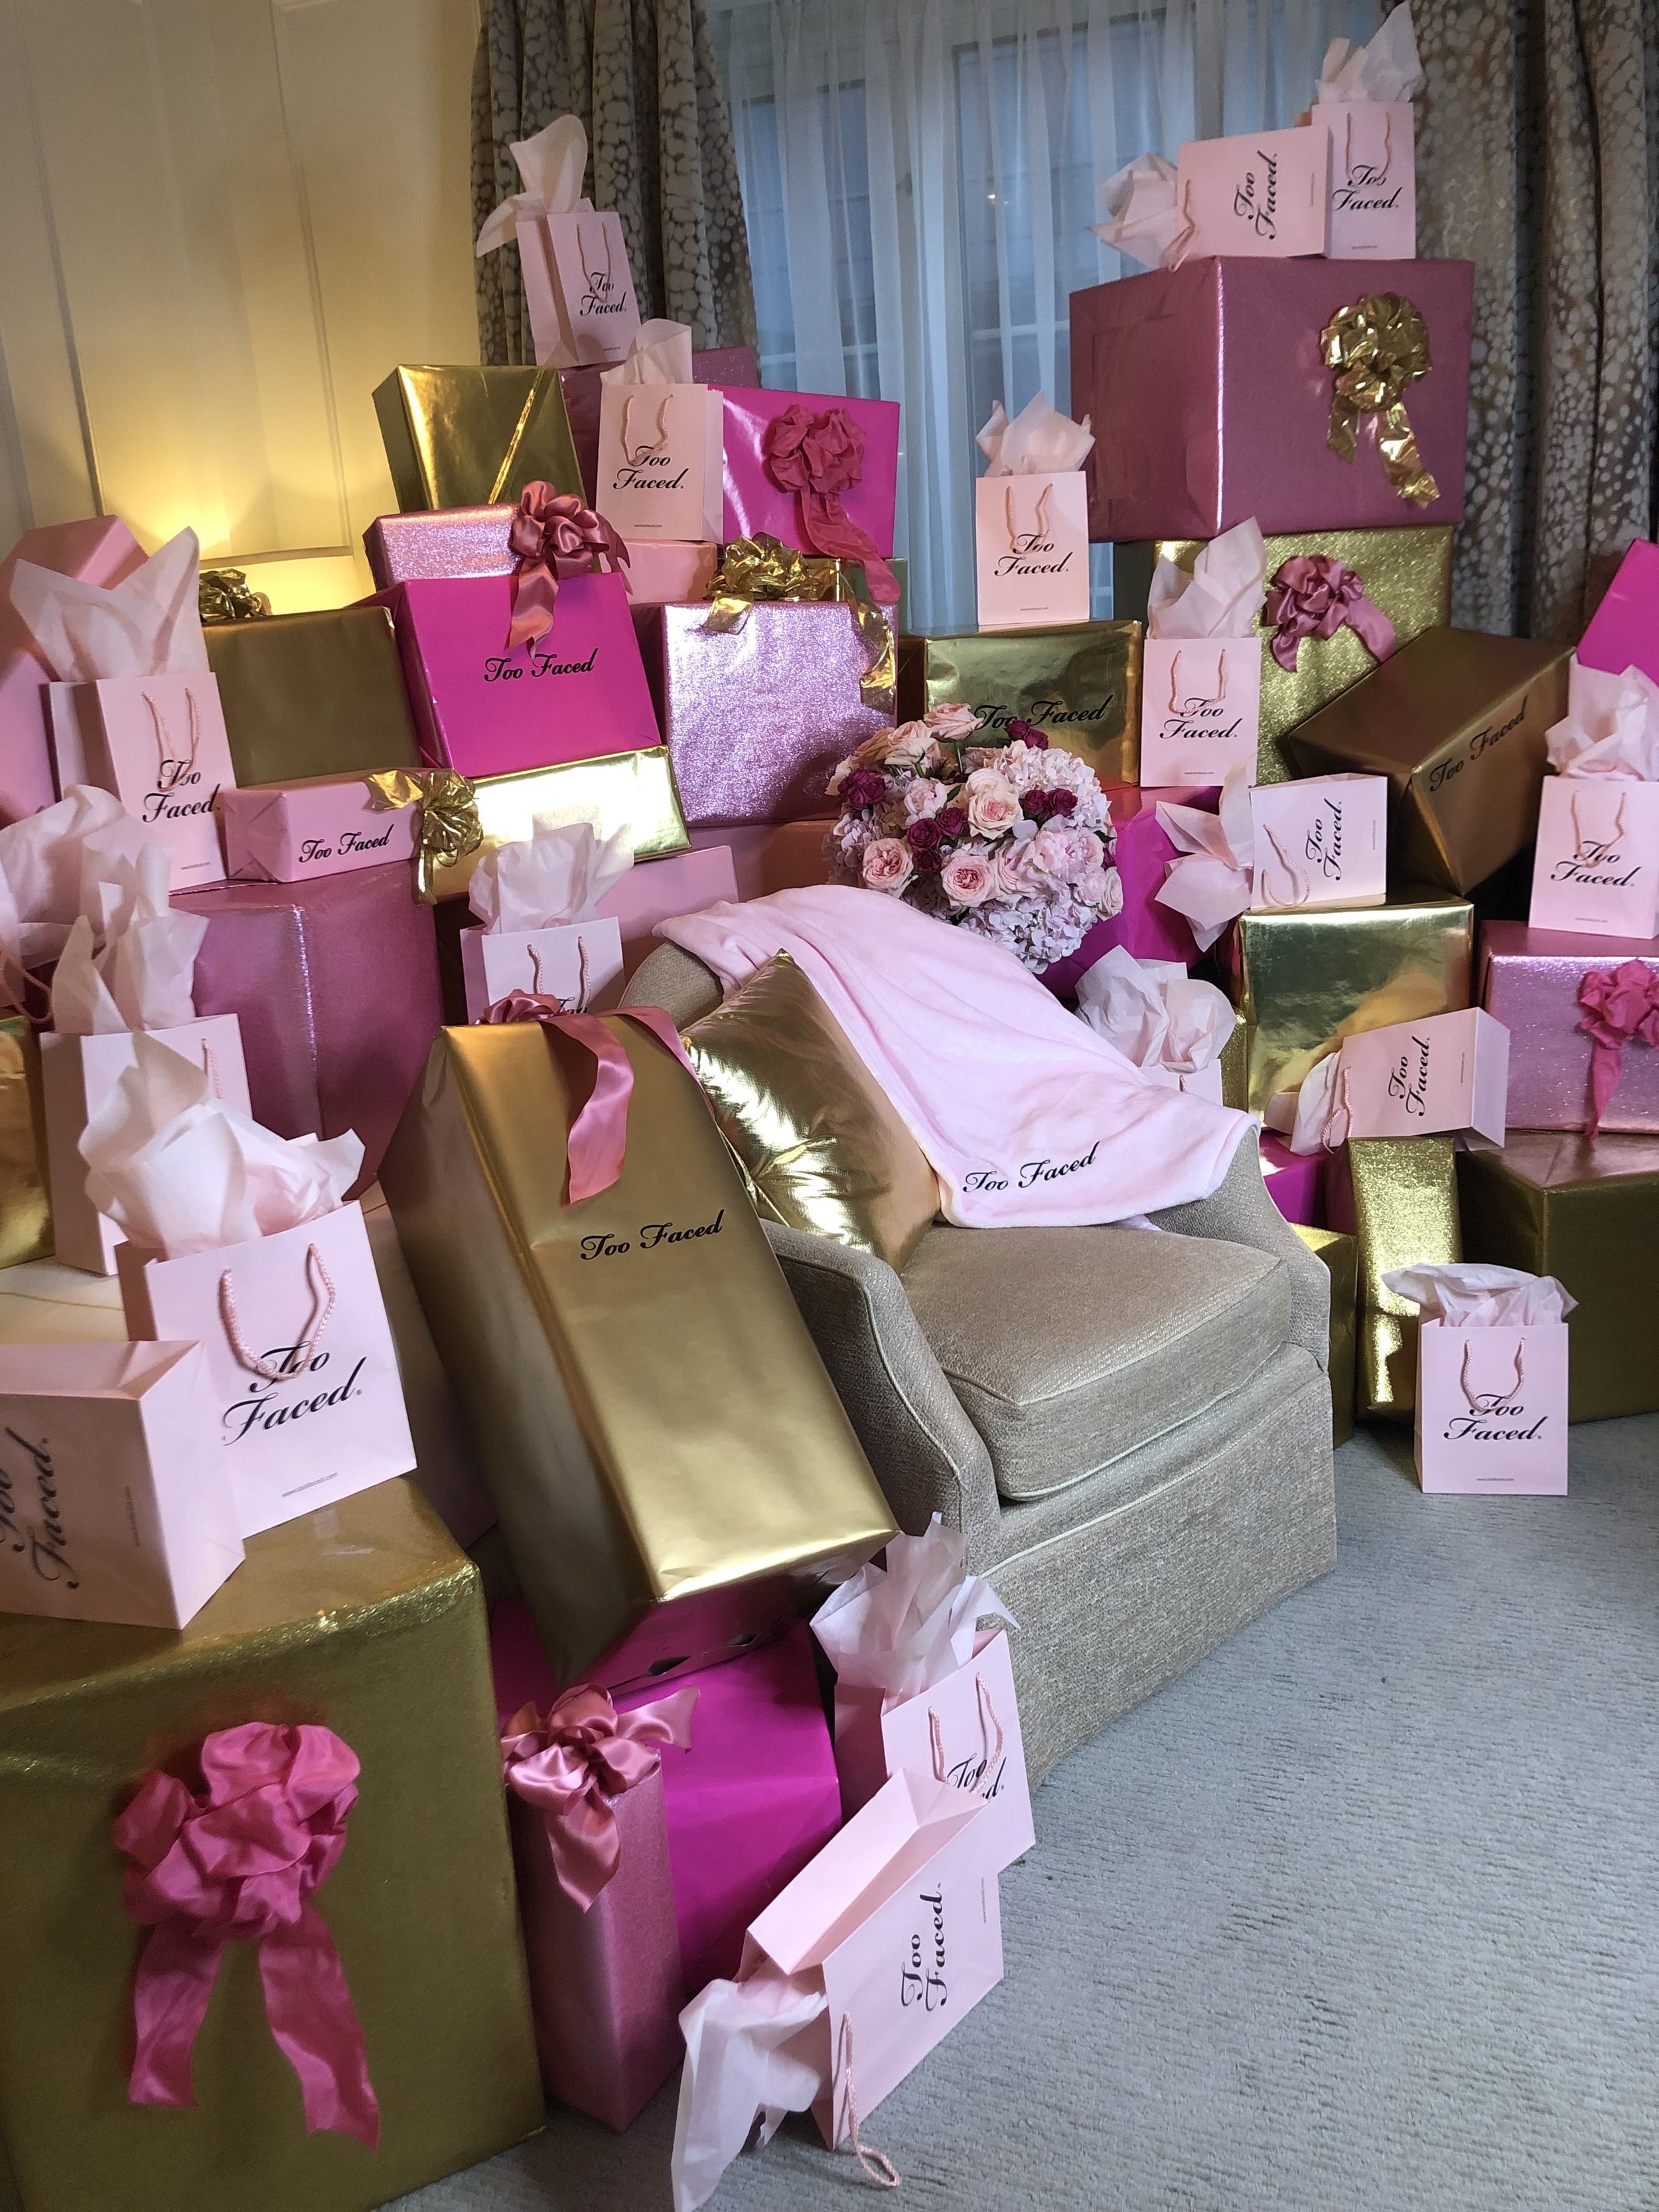 Too Faced Gift Installation- B Floral